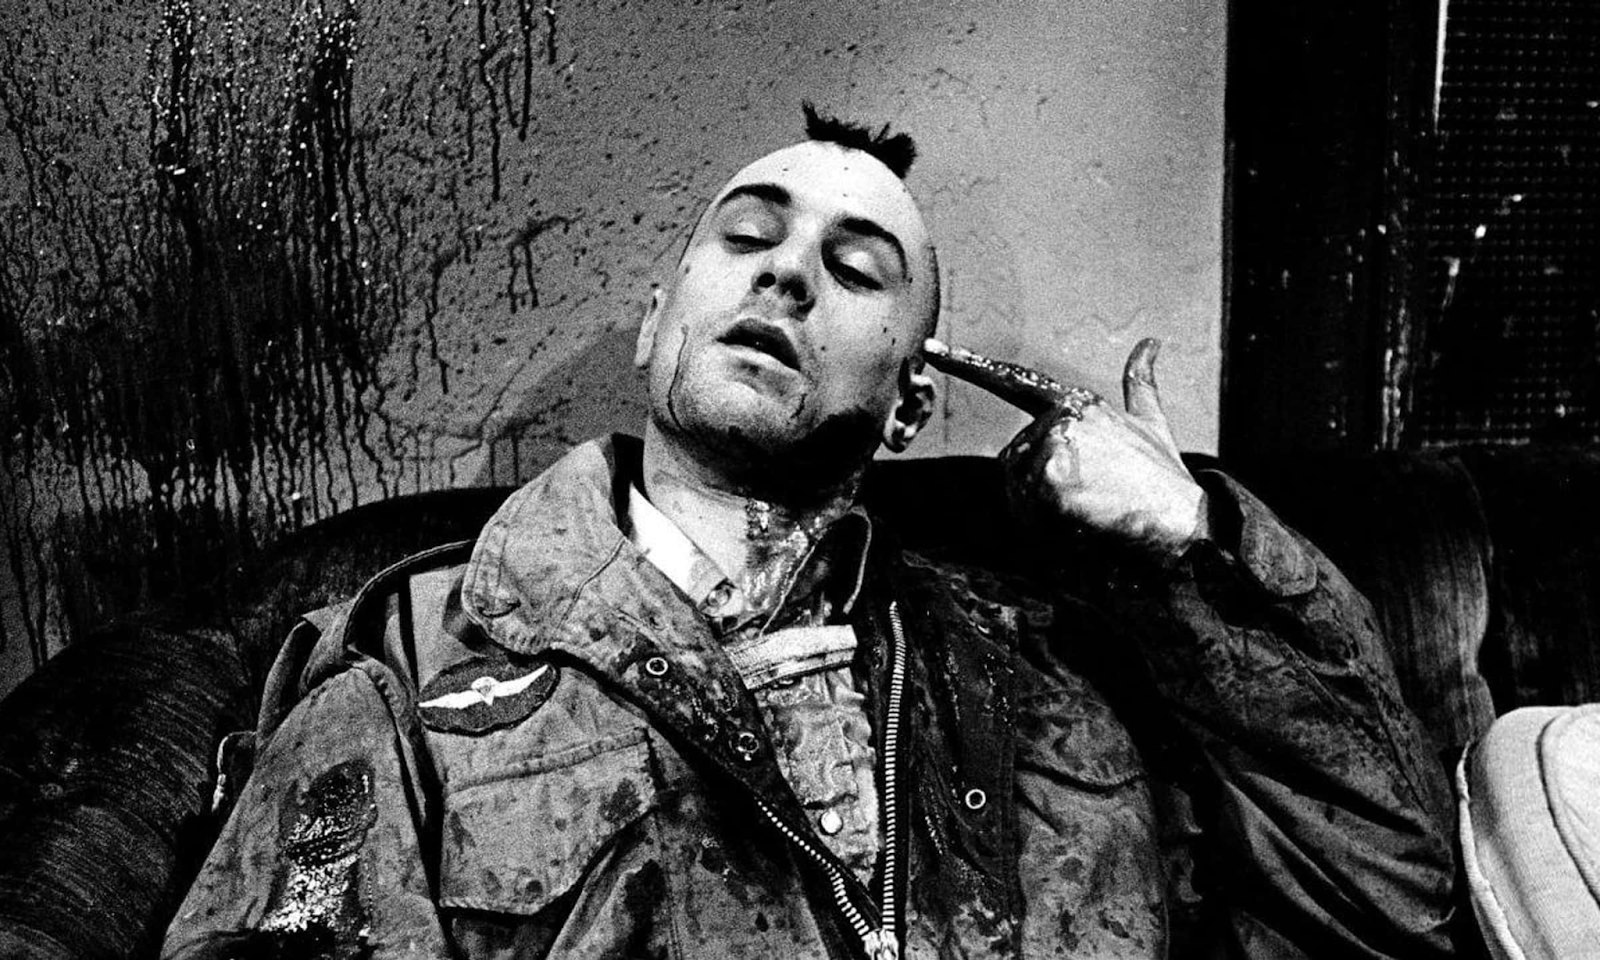 Taxi Driver (1976) — A Haunting Exploration of Isolation and